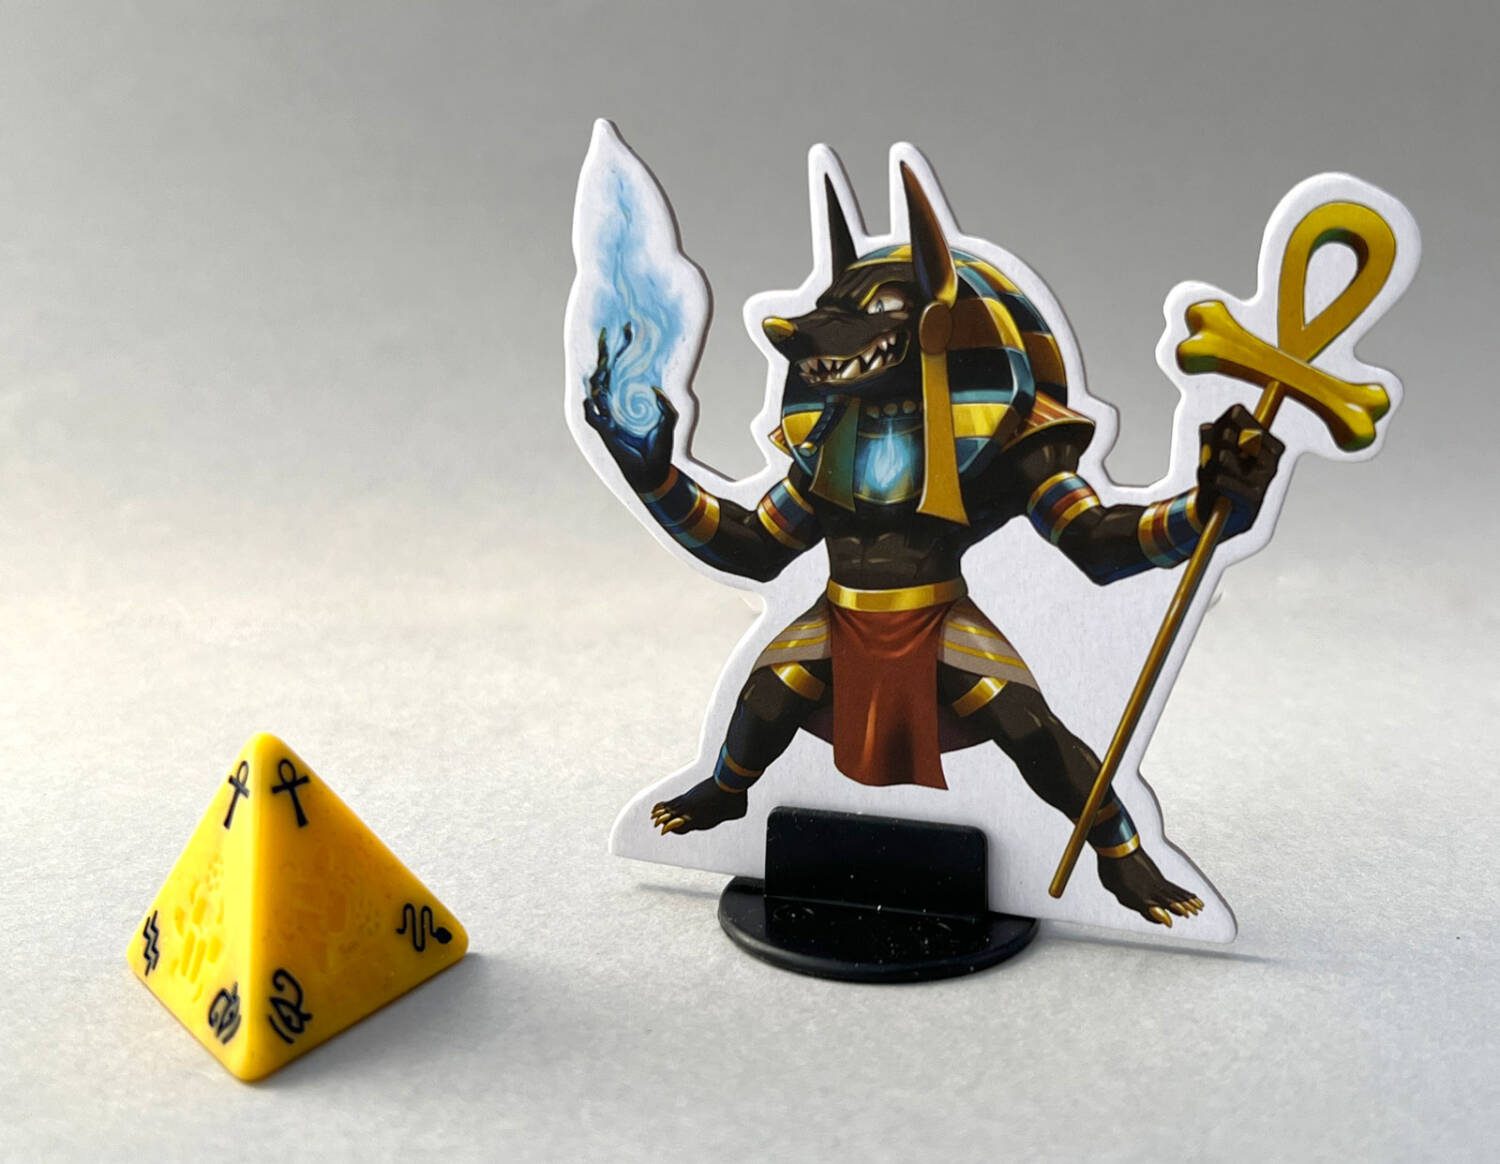 The Die of Fate and Anubis